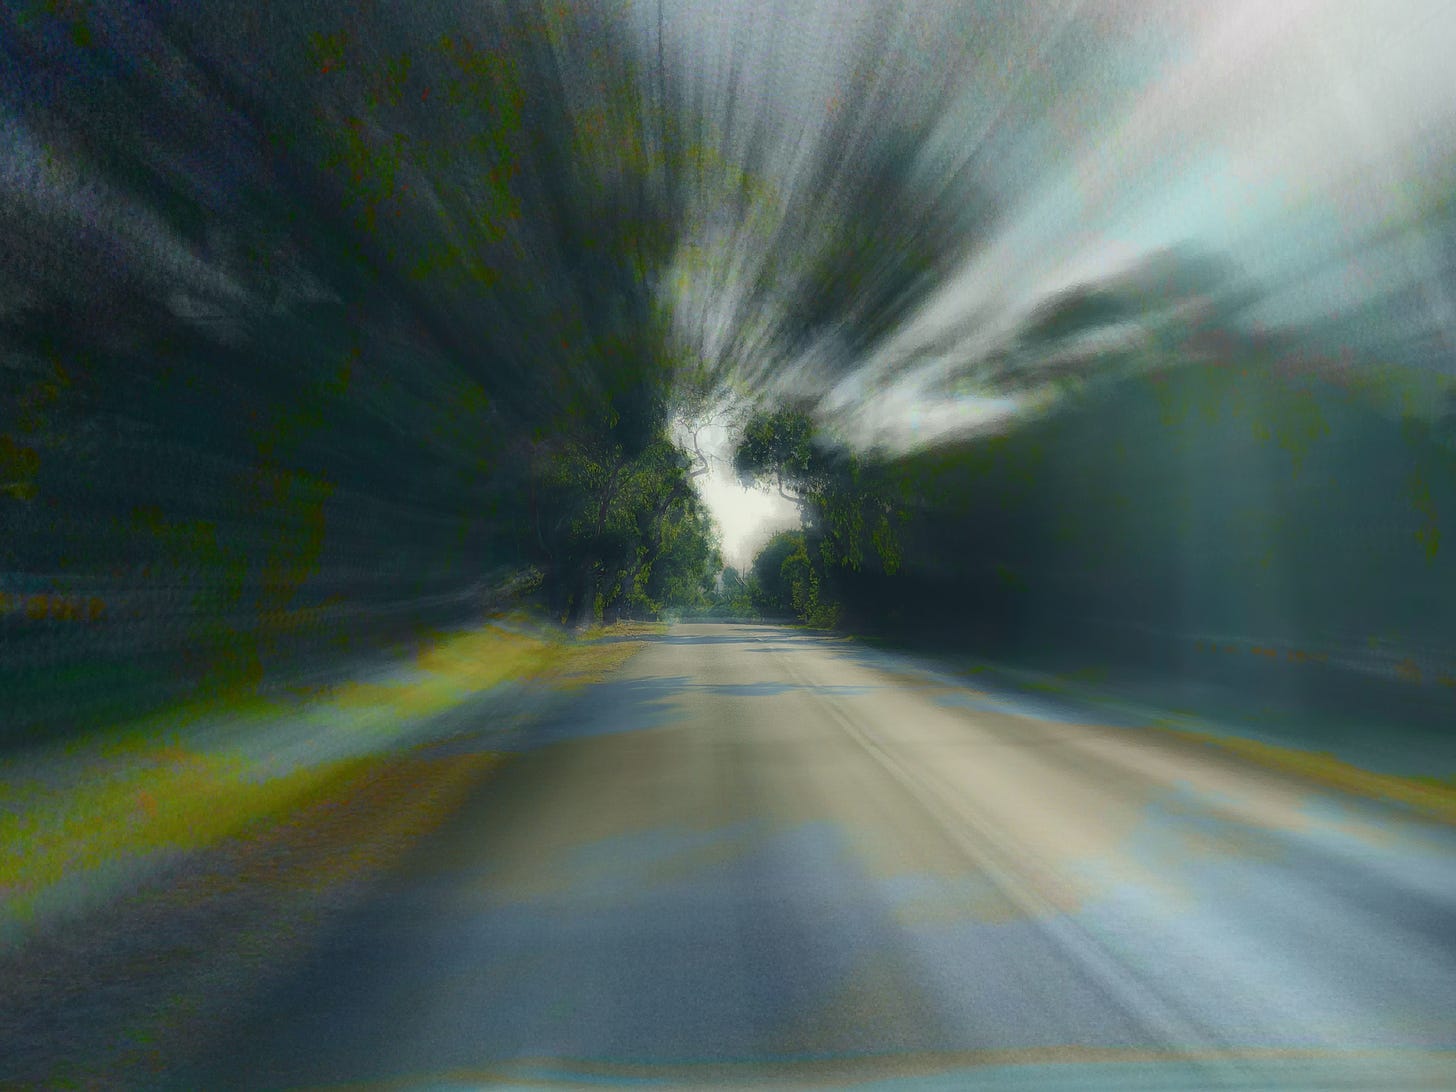 Tree-lined country road: motorcyclist's perspective, blurred by speed.